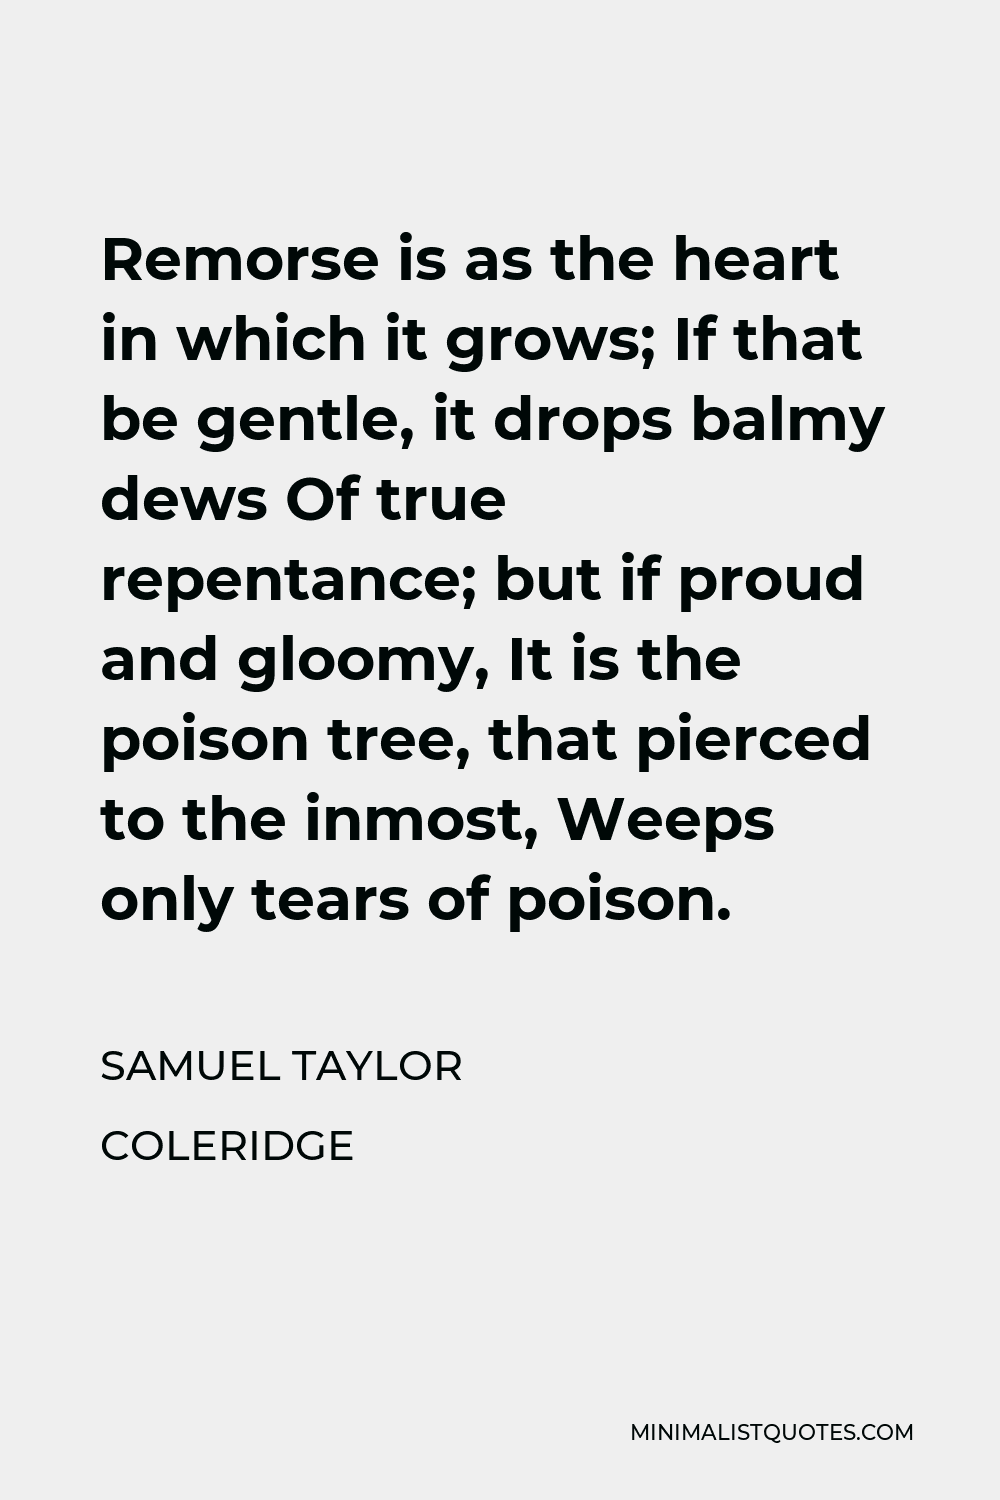 Samuel Taylor Coleridge Quote - Remorse is as the heart in which it grows; If that be gentle, it drops balmy dews Of true repentance; but if proud and gloomy, It is the poison tree, that pierced to the inmost, Weeps only tears of poison.